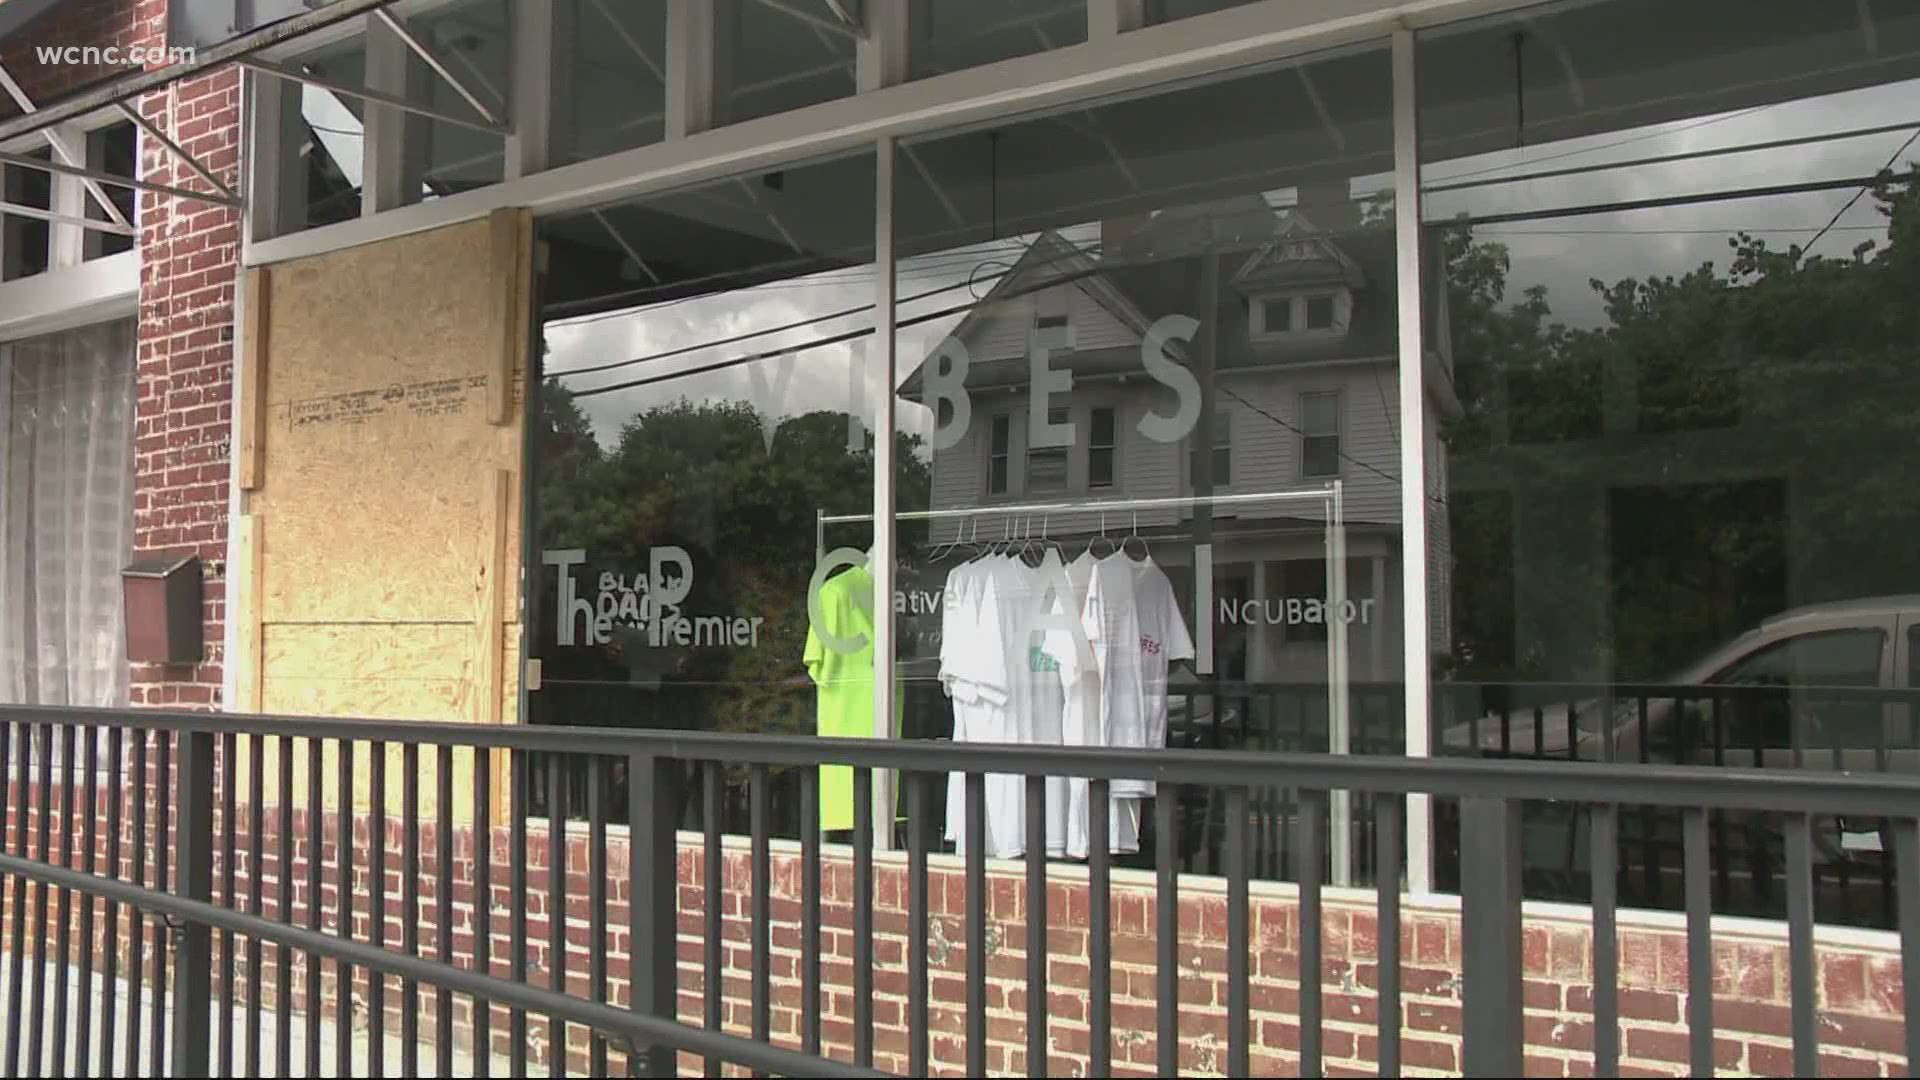 The owner of the business doesn't think it's a coincidence that the vandalism happened on the same day a confederate statue was removed nearby.